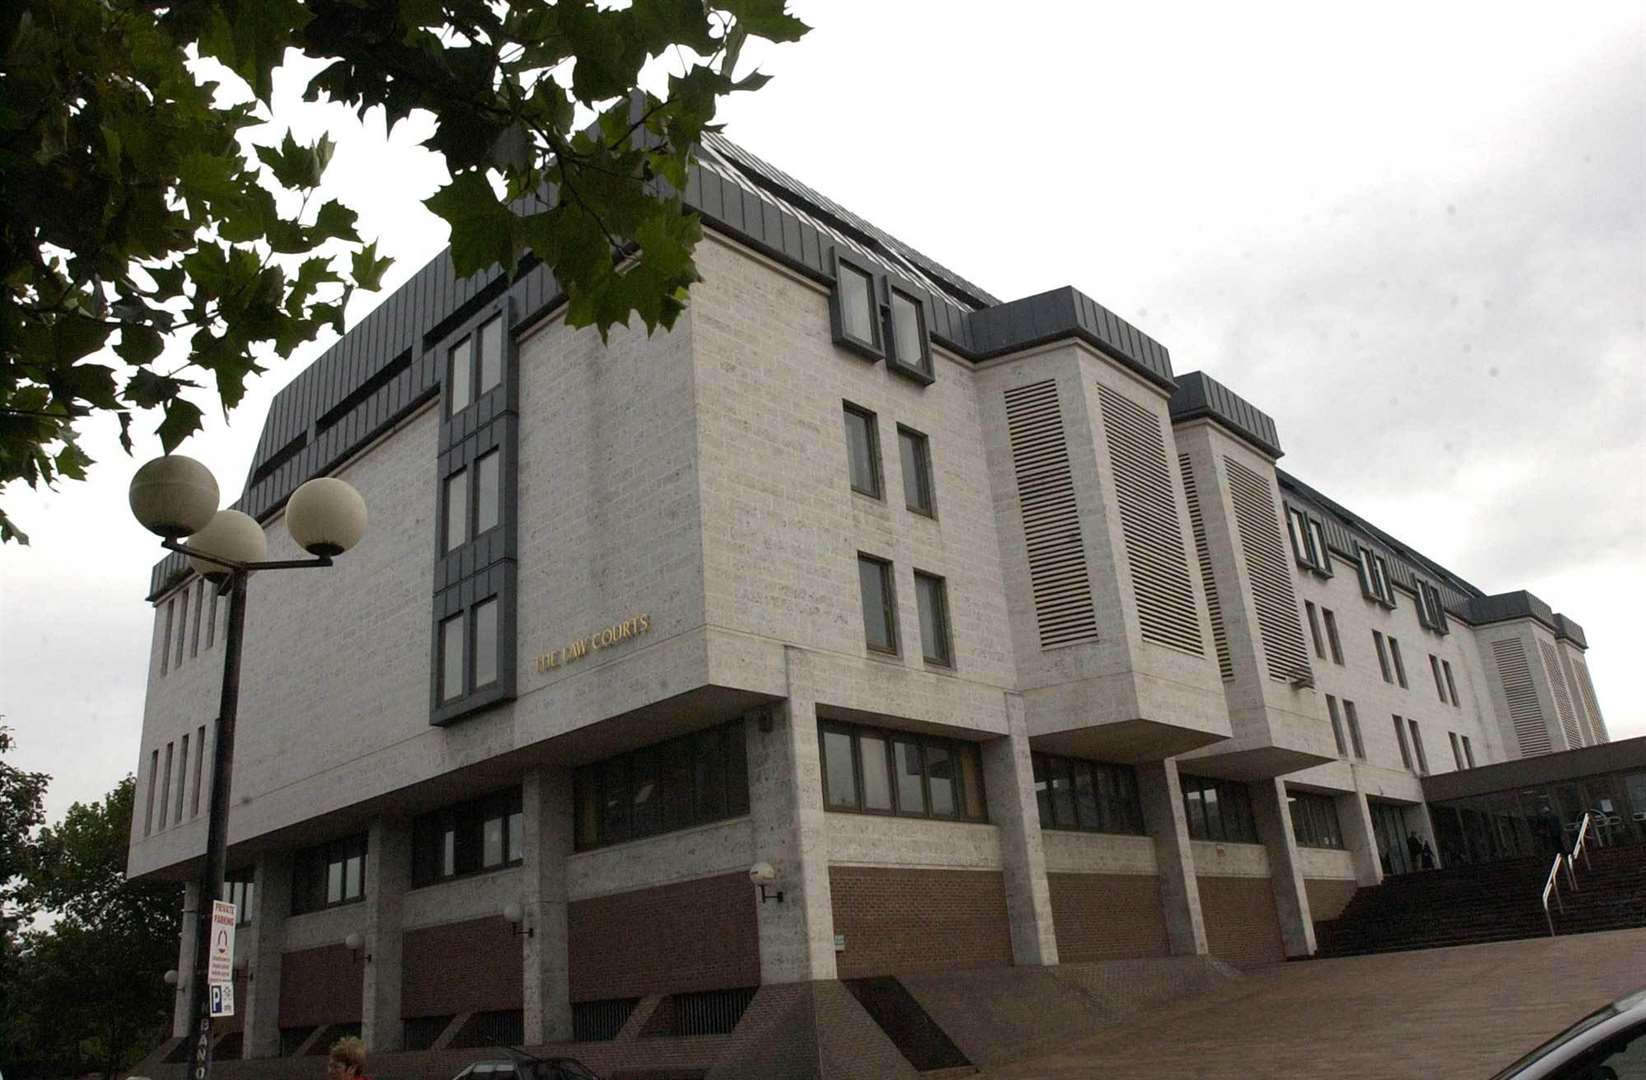 Hart and Olding were sentenced at Maidstone Crown Court